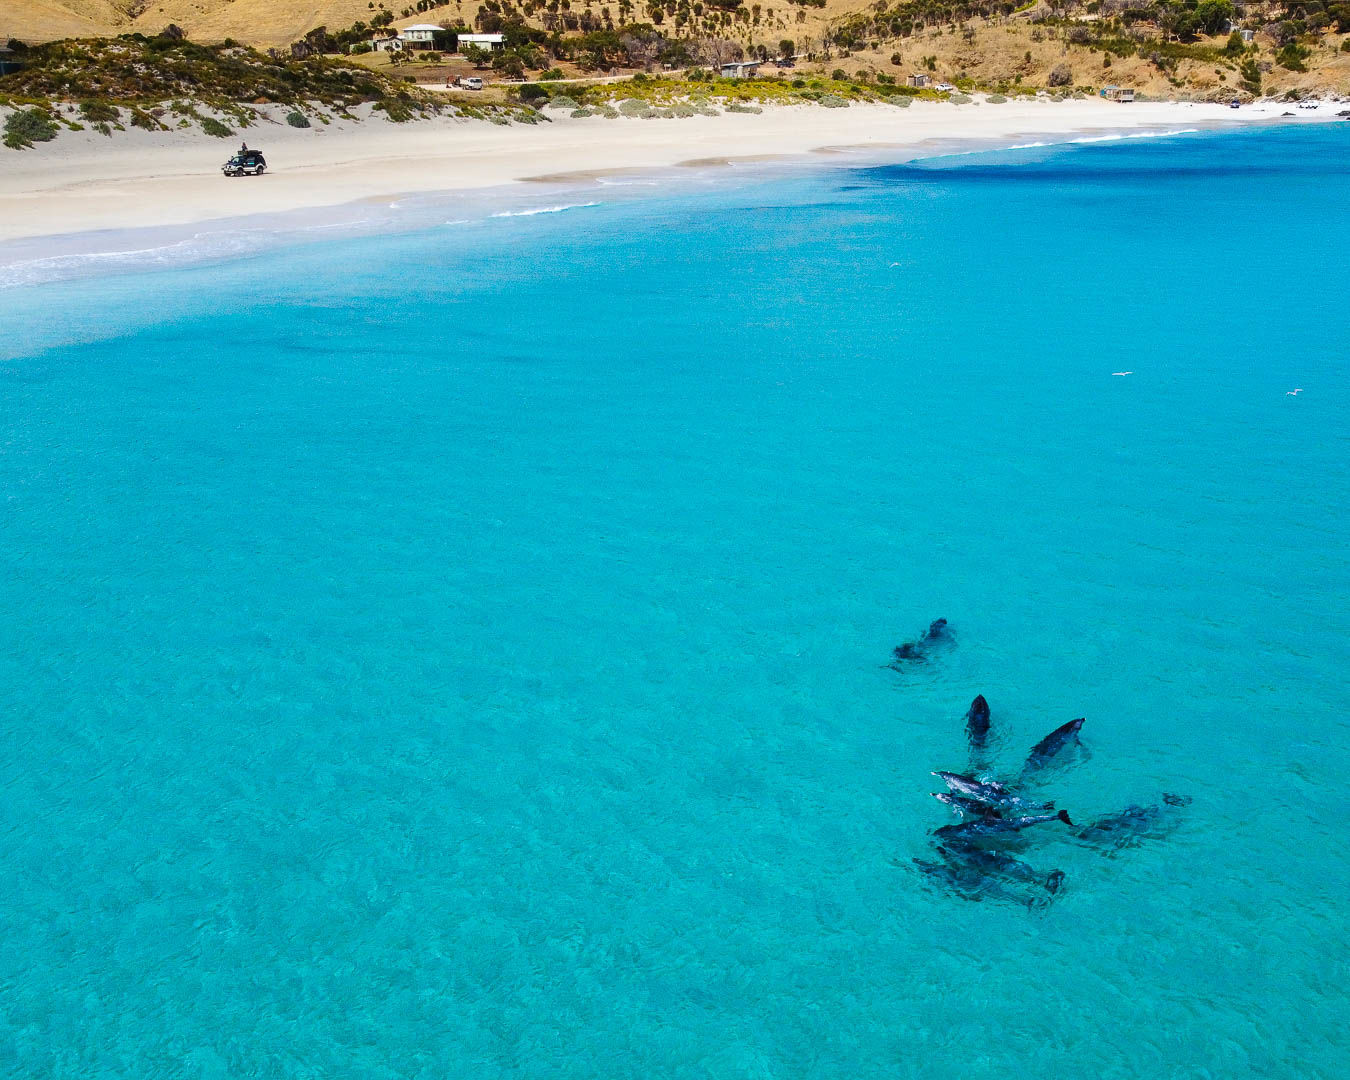 Private beach with dolphins